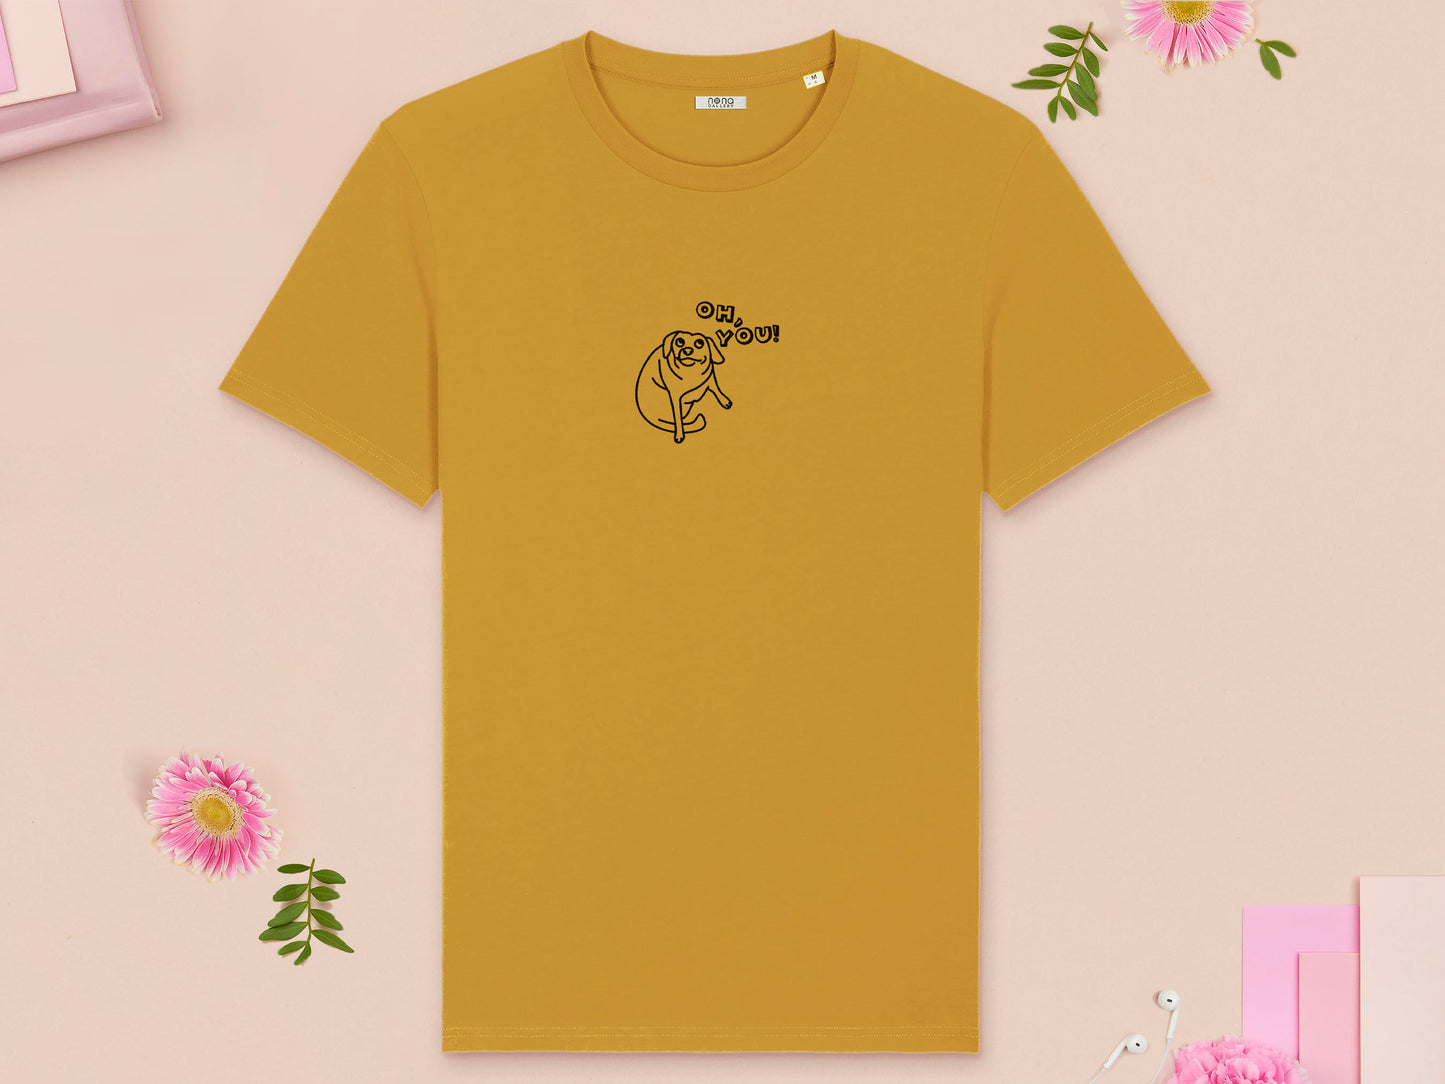 A yellow crew neck short sleeve t-shirt, with an embroidered black thread design of cute meme dog with cheeky expression and big eyes, with the text Oh You!